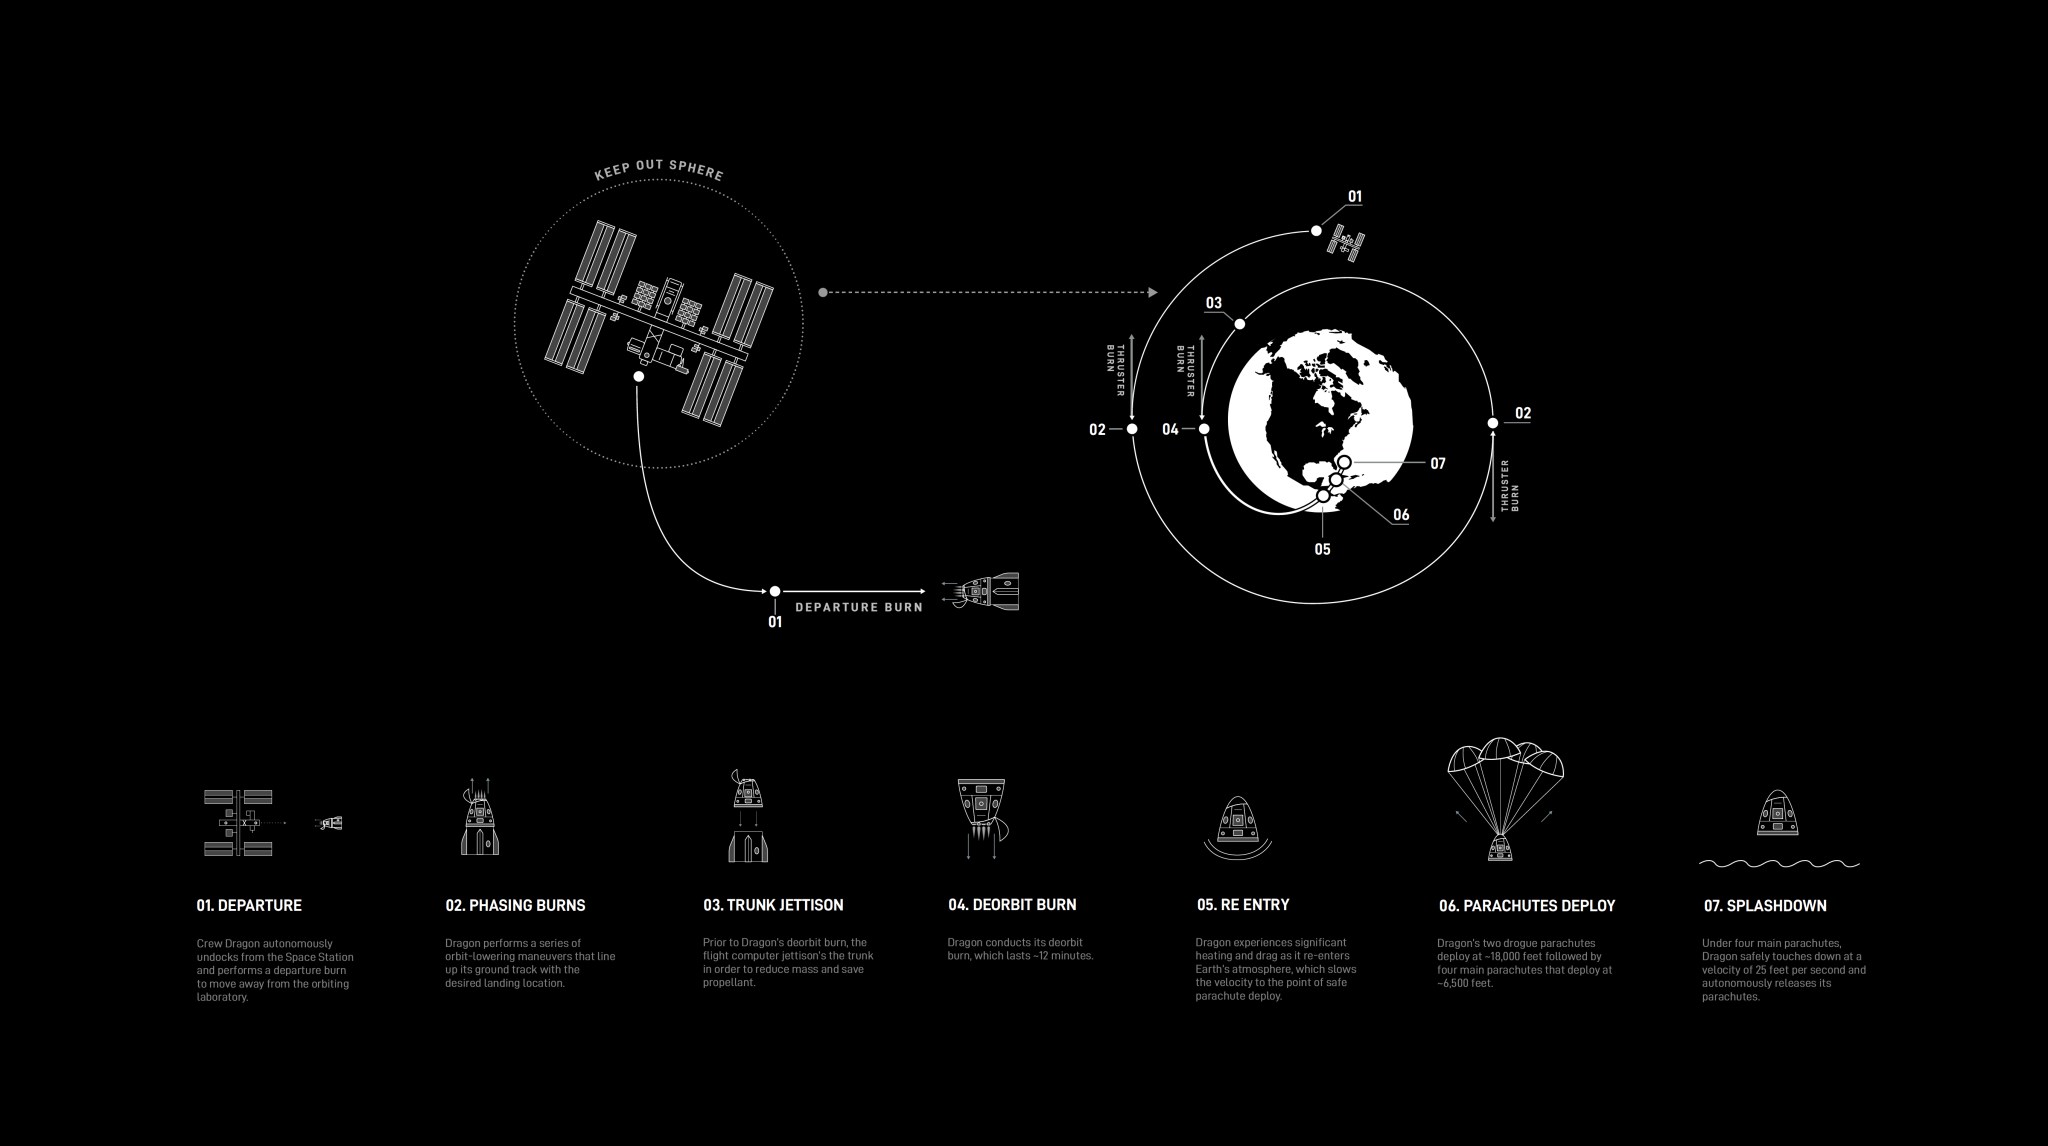 This graphic details return operations for SpaceX missions to the International Space Station.